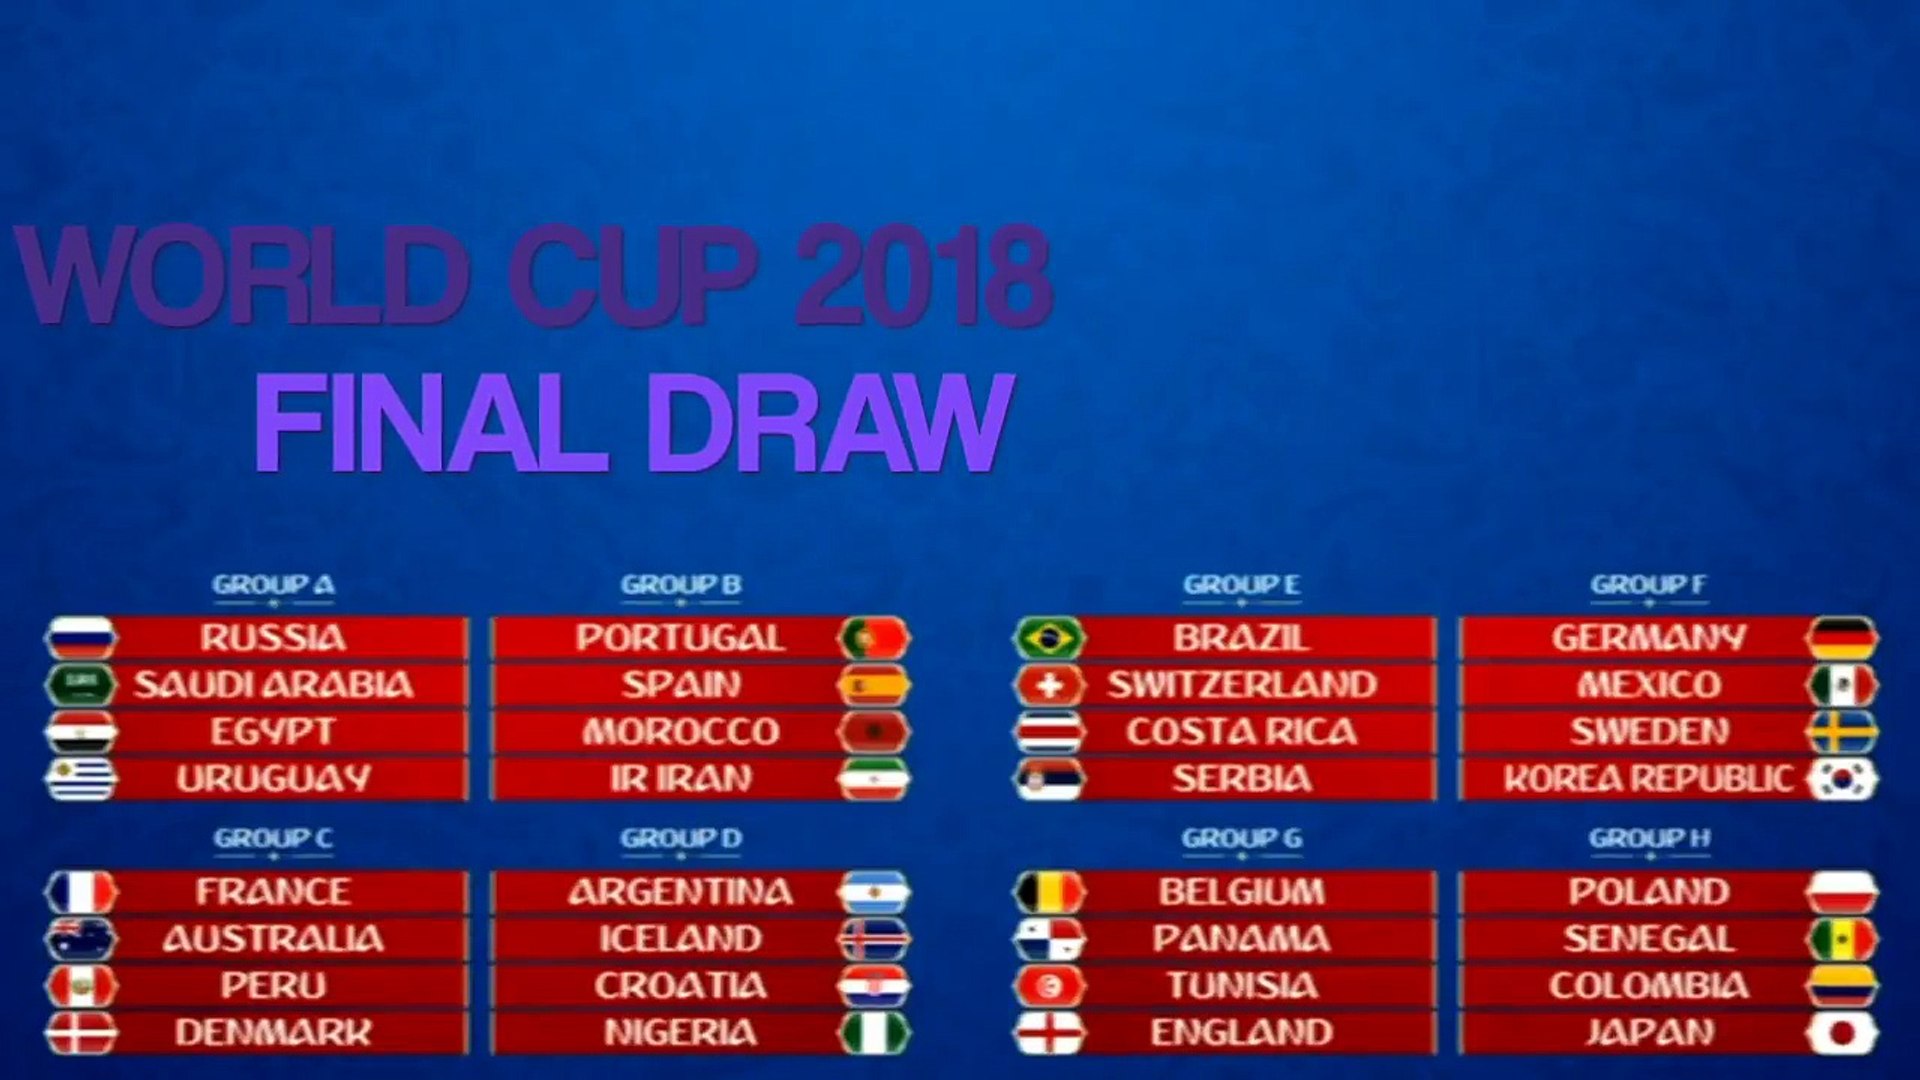 FIFA World Cup 2018 - Final Draw Results